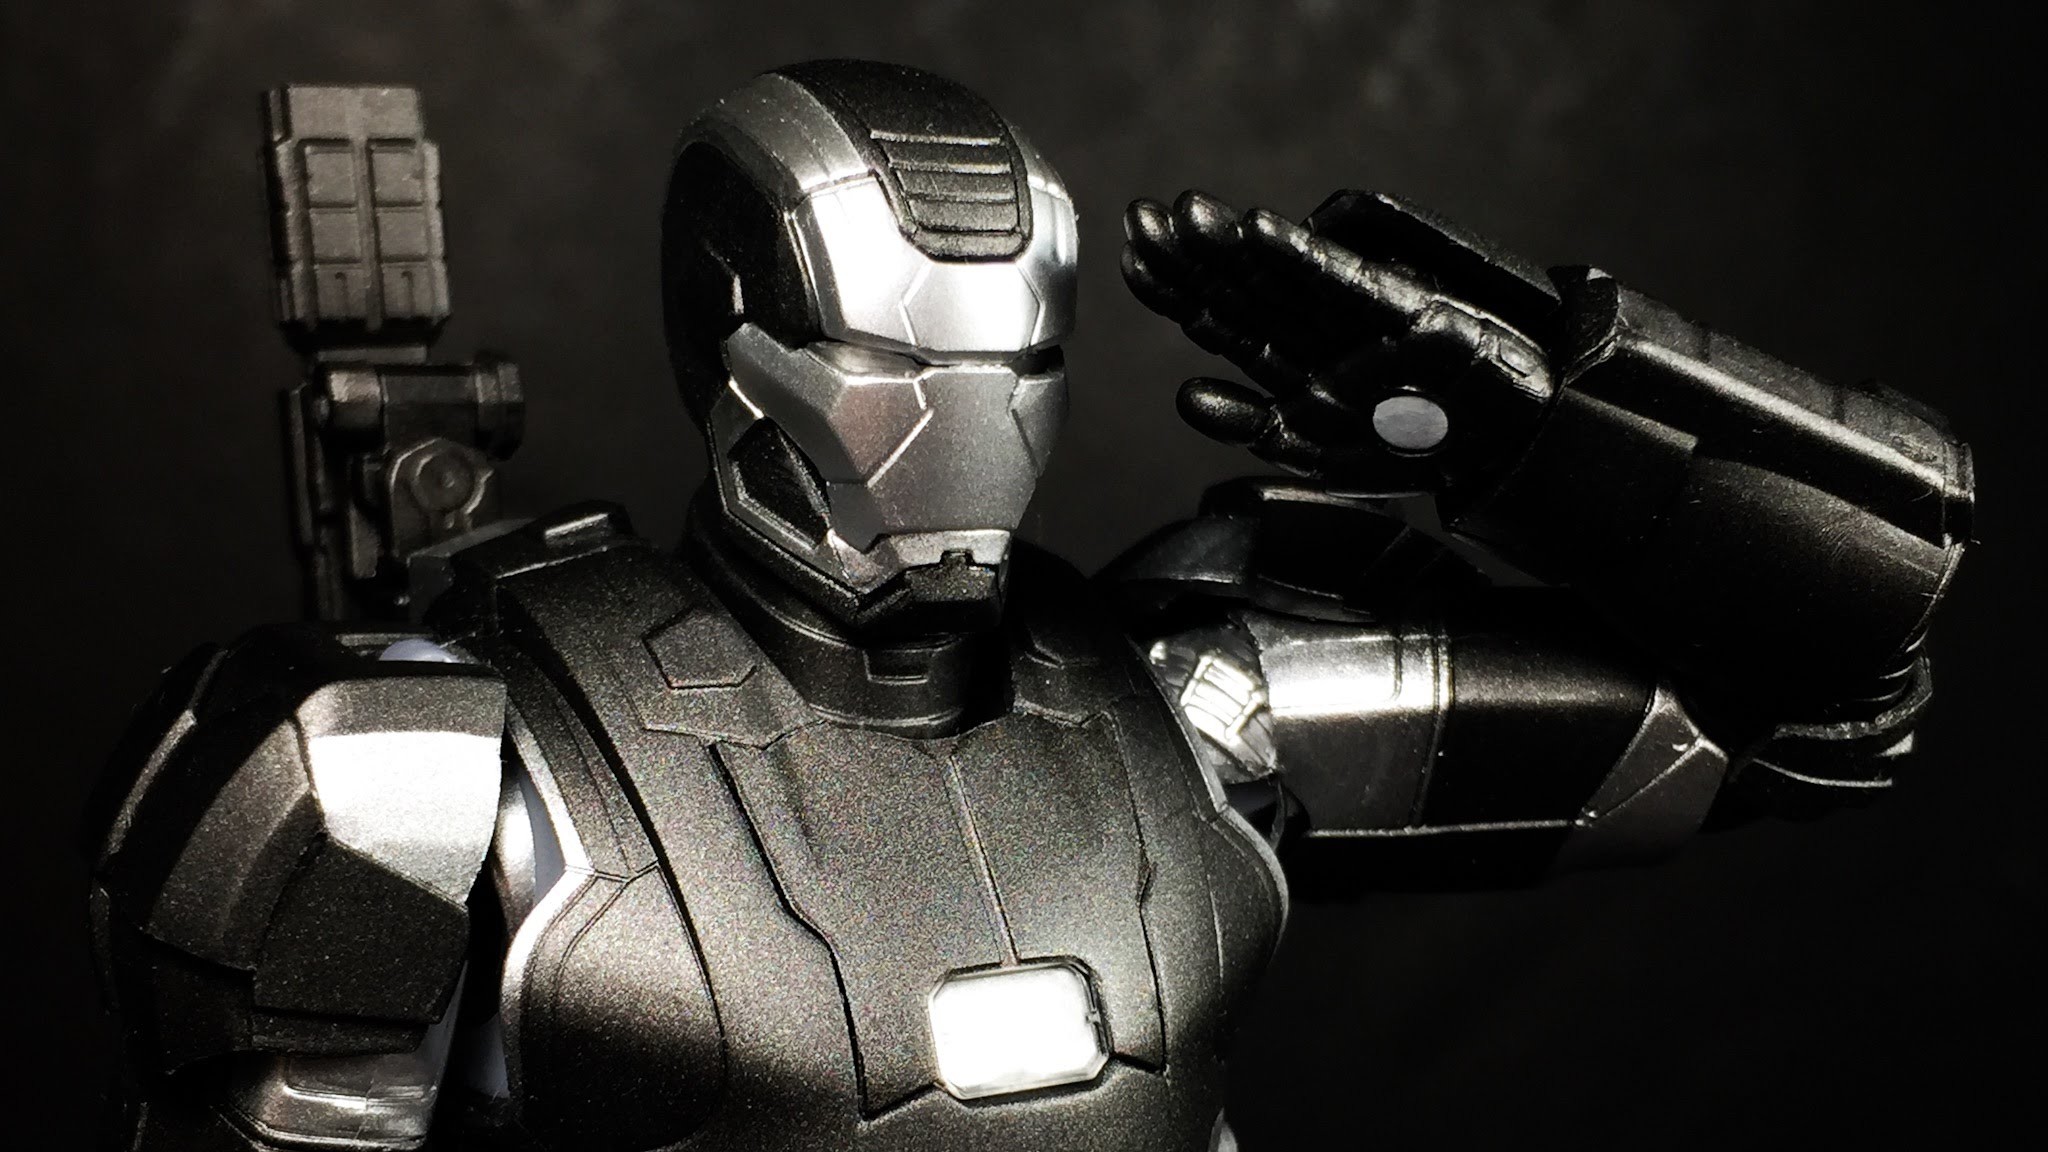 S.H. Figuarts War Machine Mark 2 (Avengers: Age of Ultron) | REVIEW